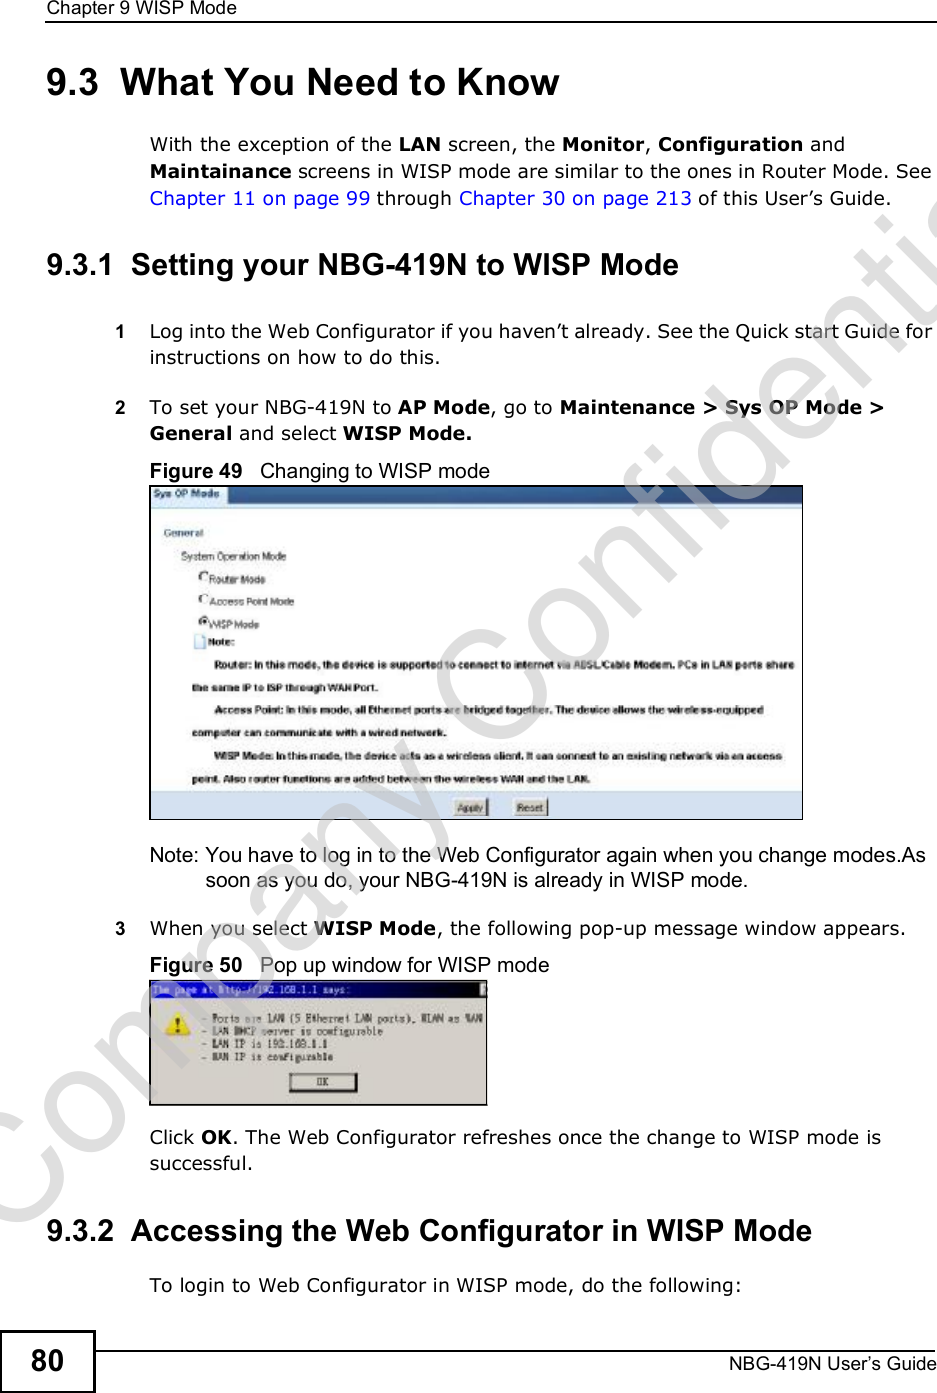 Chapter 9WISP ModeNBG-419N User s Guide809.3  What You Need to KnowWith the exception of the LAN screen, the Monitor, Configuration and Maintainance screens in WISP mode are similar to the ones in Router Mode. See Chapter 11 on page 99 through Chapter 30 on page 213 of this User!s Guide.9.3.1  Setting your NBG-419N to WISP Mode1Log into the Web Configurator if you haven!t already. See the Quick start Guide for instructions on how to do this.2To set your NBG-419N to AP Mode, go to Maintenance &gt; Sys OP Mode &gt; General and select WISP Mode.Figure 49   Changing to WISP modeNote: You have to log in to the Web Configurator again when you change modes.As soon as you do, your NBG-419N is already in WISP mode.3When you select WISP Mode, the following pop-up message window appears.Figure 50   Pop up window for WISP mode Click OK. The Web Configurator refreshes once the change to WISP mode is successful.9.3.2  Accessing the Web Configurator in WISP ModeTo login to Web Configurator in WISP mode, do the following:Company Confidential